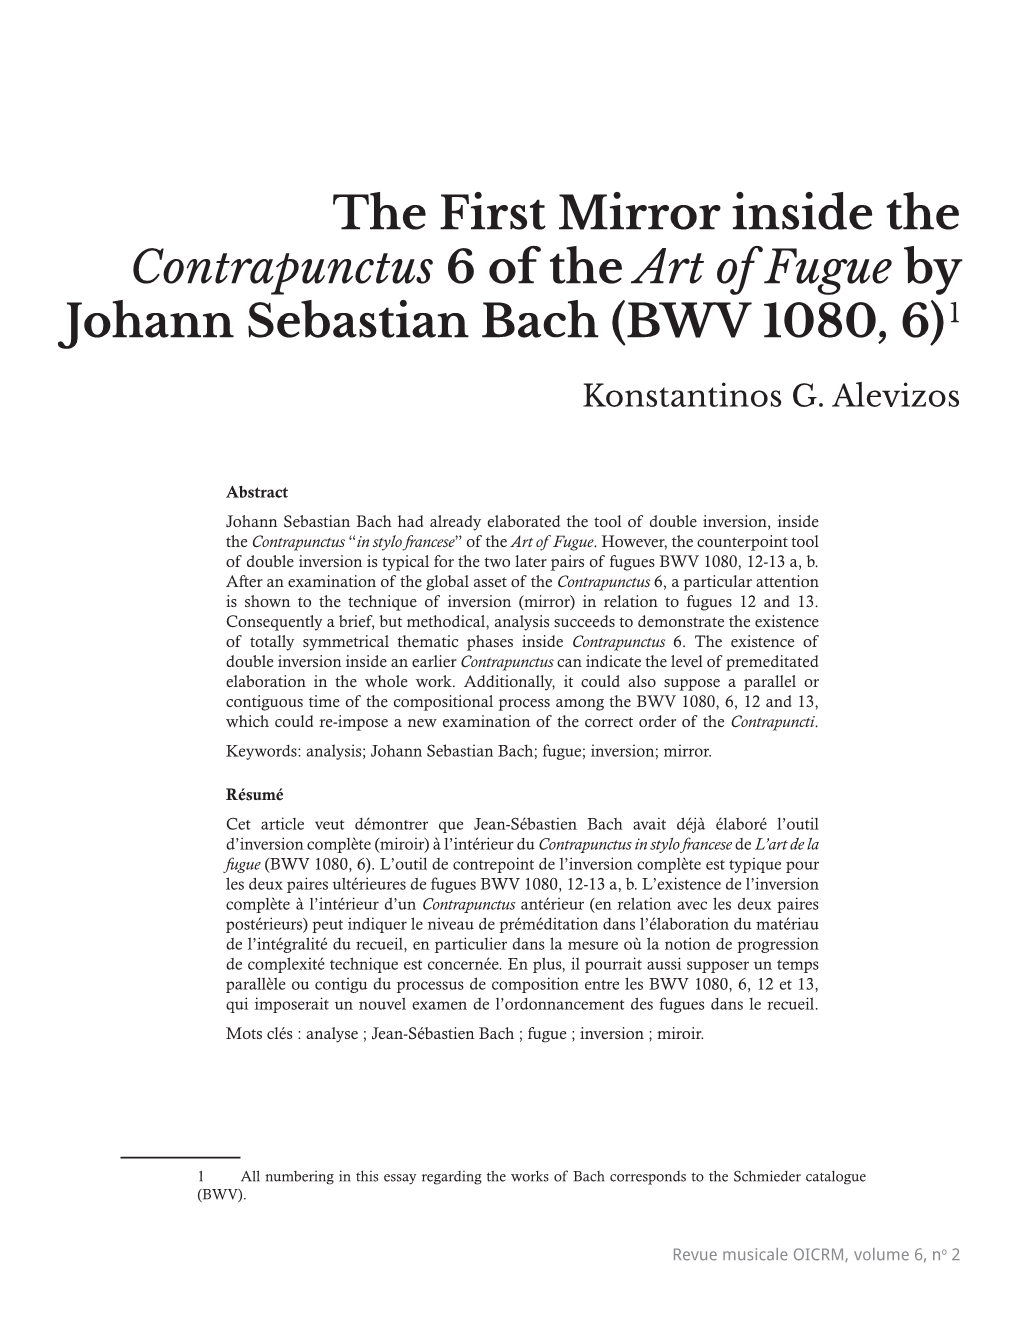 The First Mirror Inside the Contrapunctus 6 of the Art of Fugue by Johann Sebastian Bach (BWV 1080, 6) 1